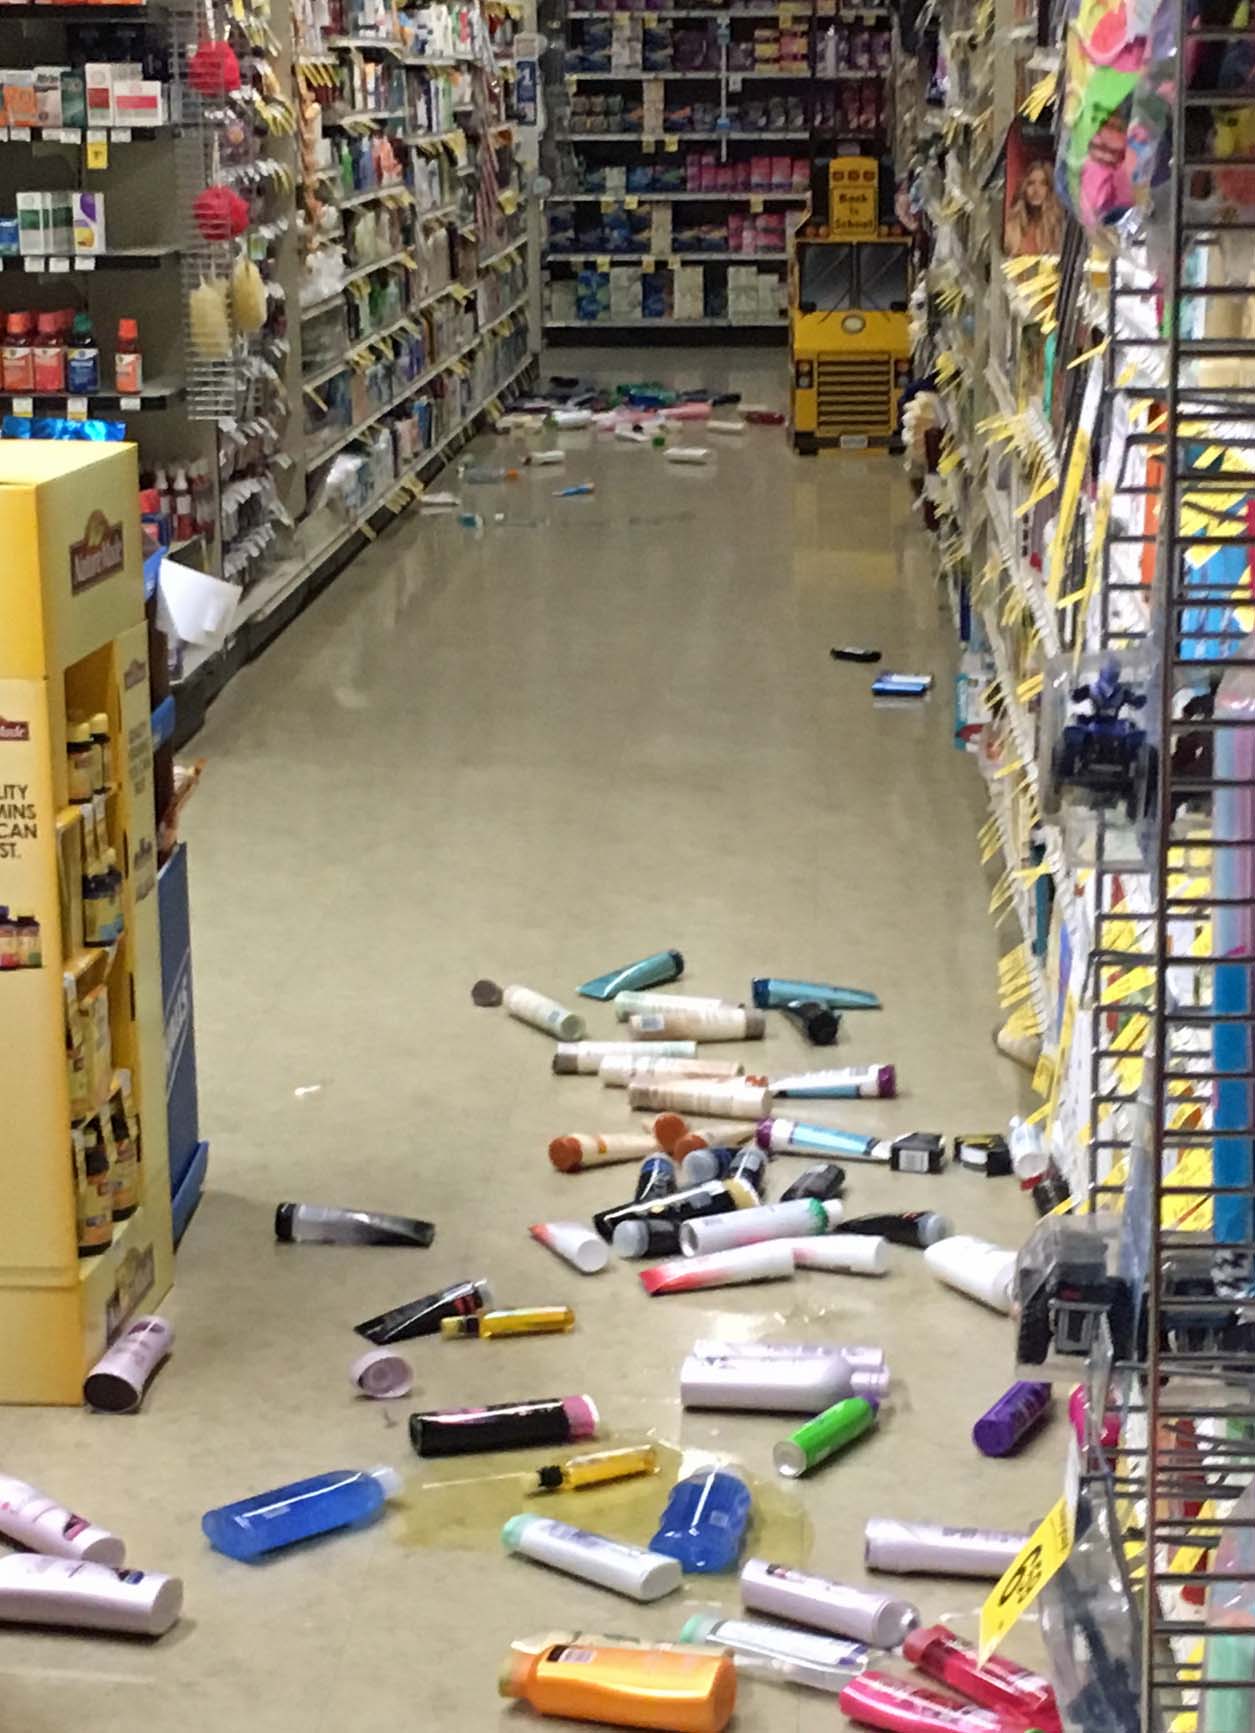 The Safeway in Homer had some cluttered aisles Sunday morning after the earthquake. (Photo by Perry Lynn )